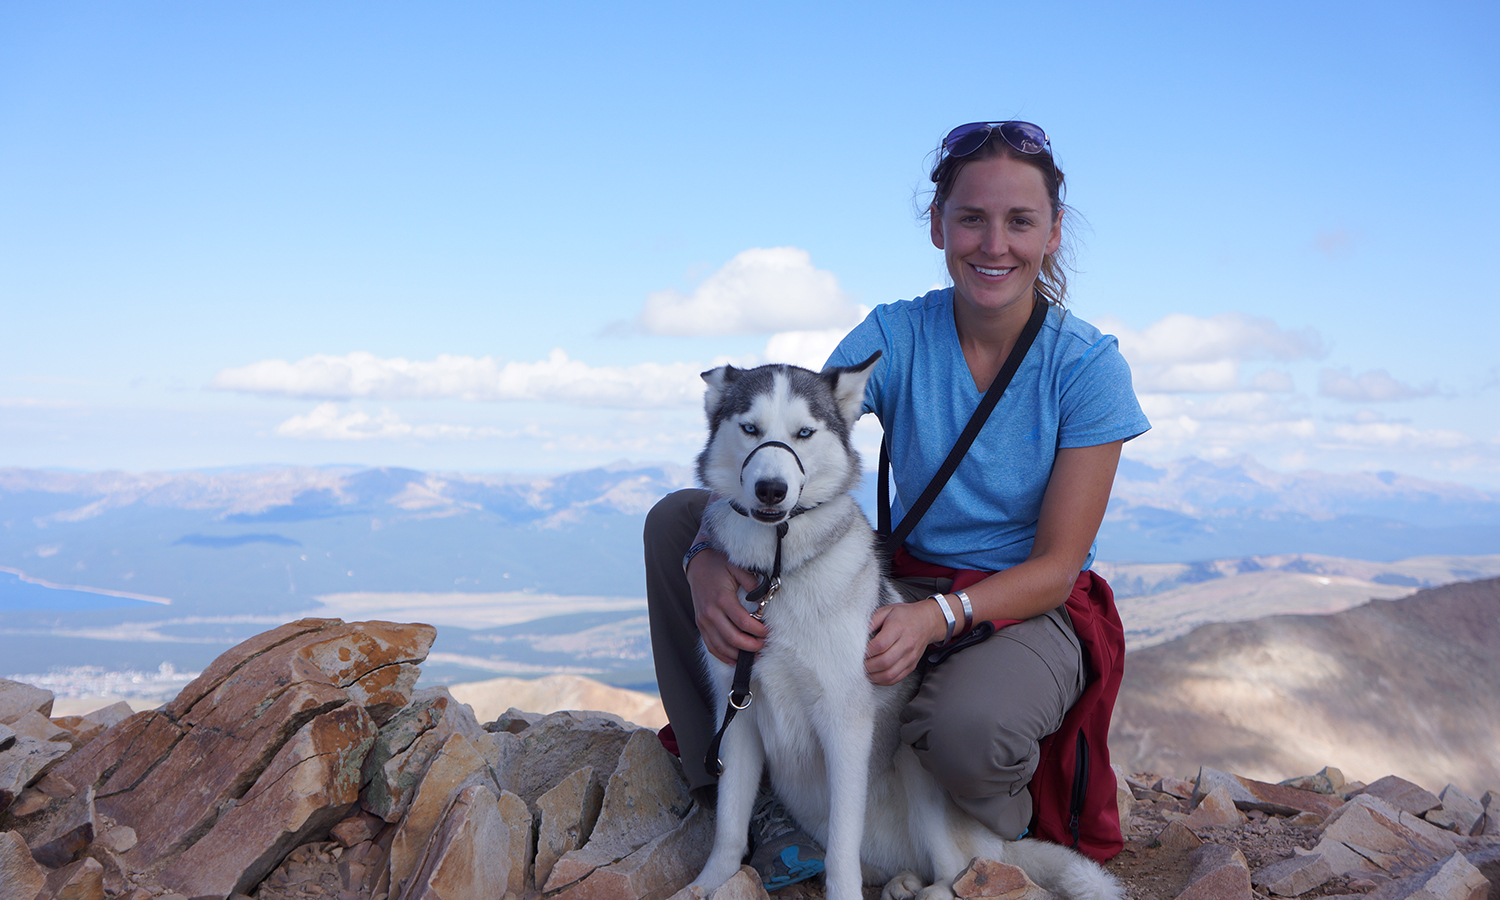 Blog Author Margaux posting a top a mountain with her dog.